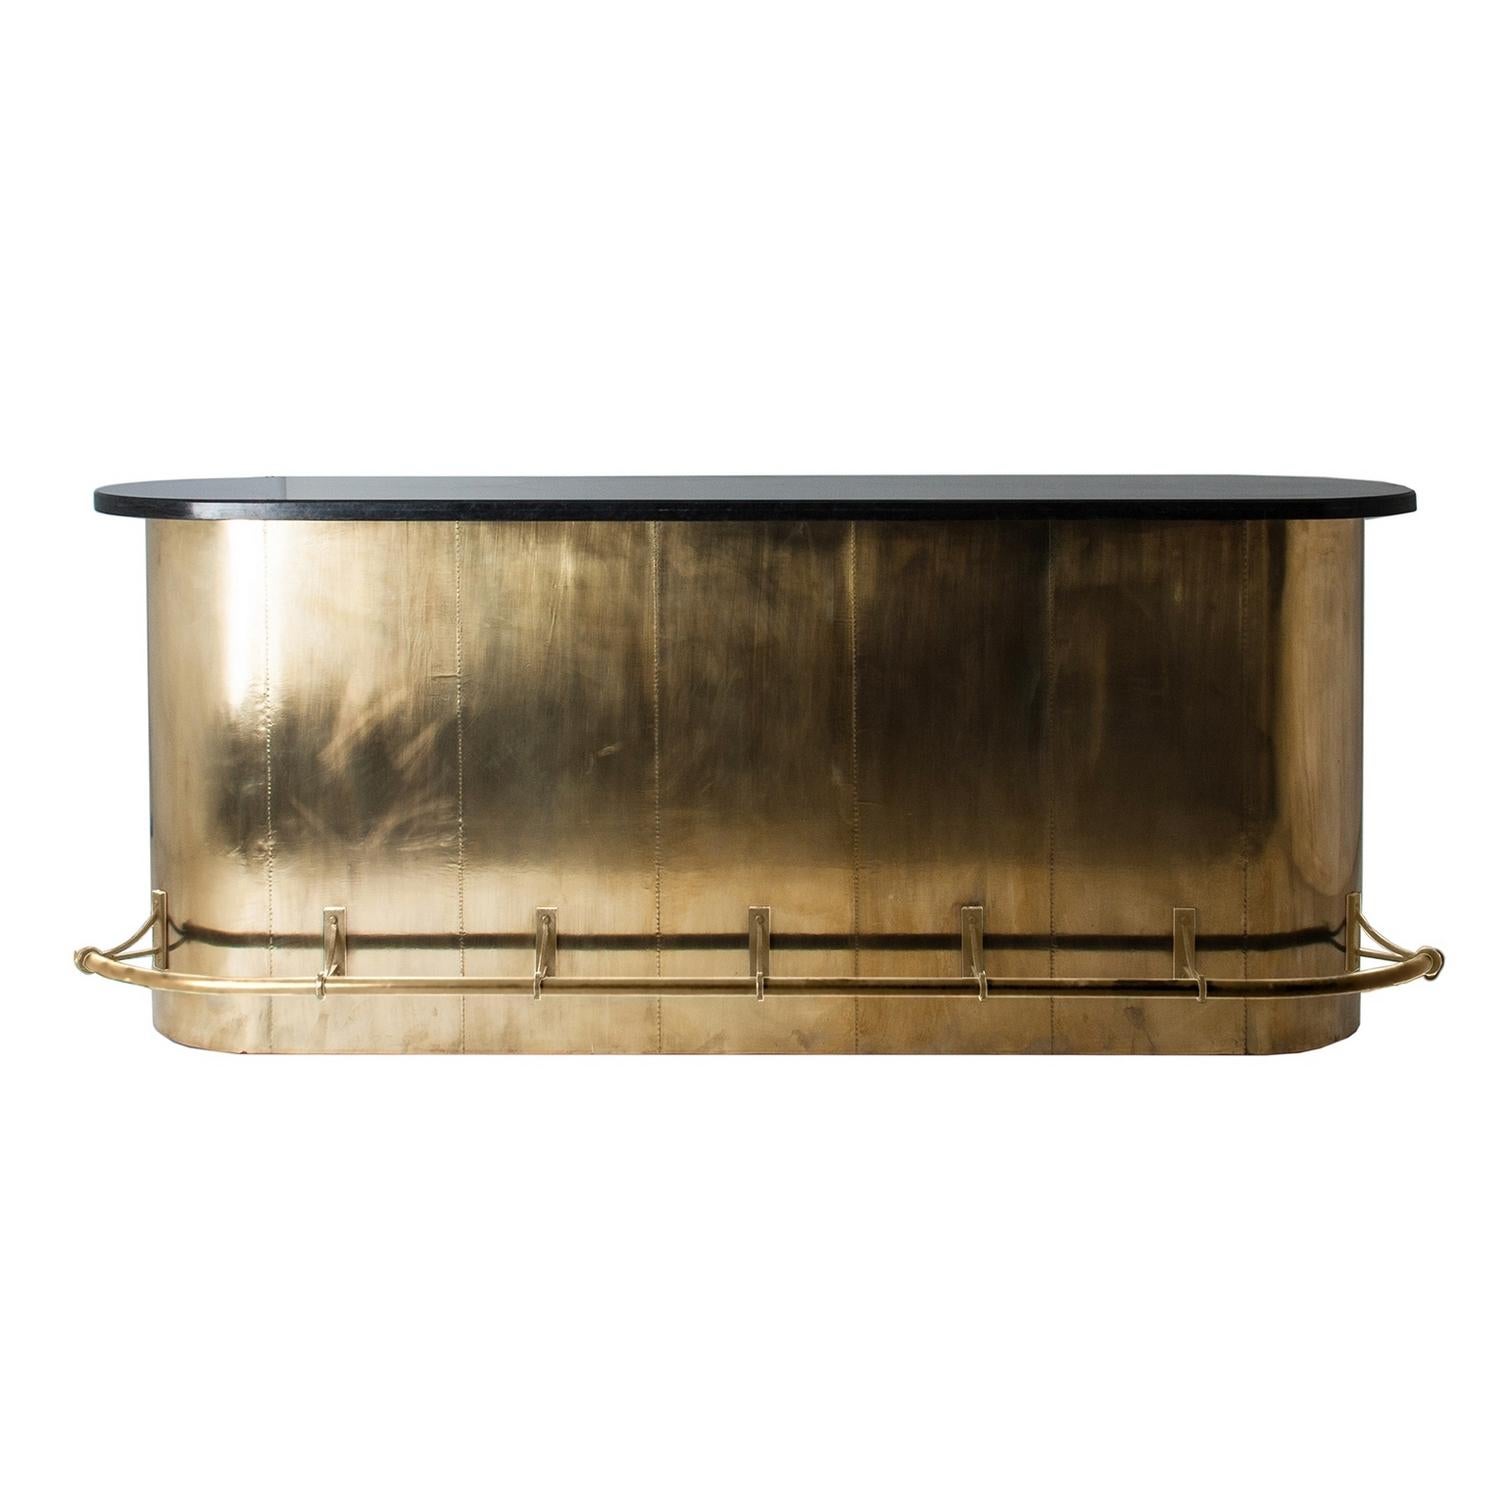 Oval black bevelled marble stone tray, curved and rounded lines bar or counter table sparkling and sophisticated with black lacquered wooden and brass finishes, opening shelves spaces on the other side. Amazing!